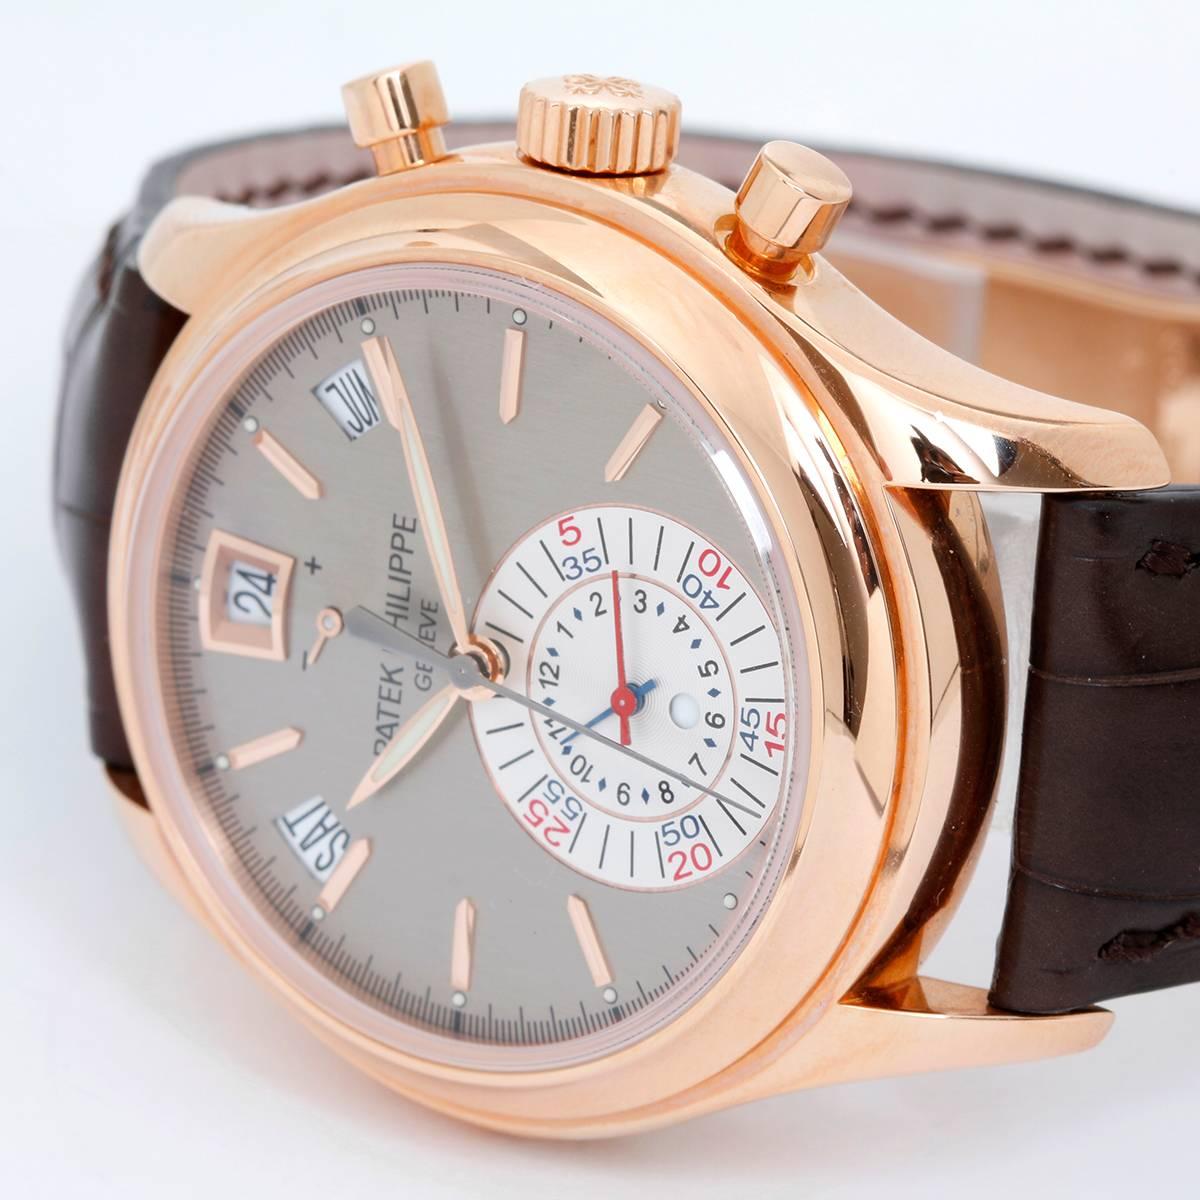 Patek Philippe Calatrava Chronograph Men's 18k Rose Gold Watch  5960 R -  Automatic winding. 18k rose gold case with exposition back (40mm diameter). Pre-owned with Patek Philippe  box and papers dated Nov. 1st 2016.